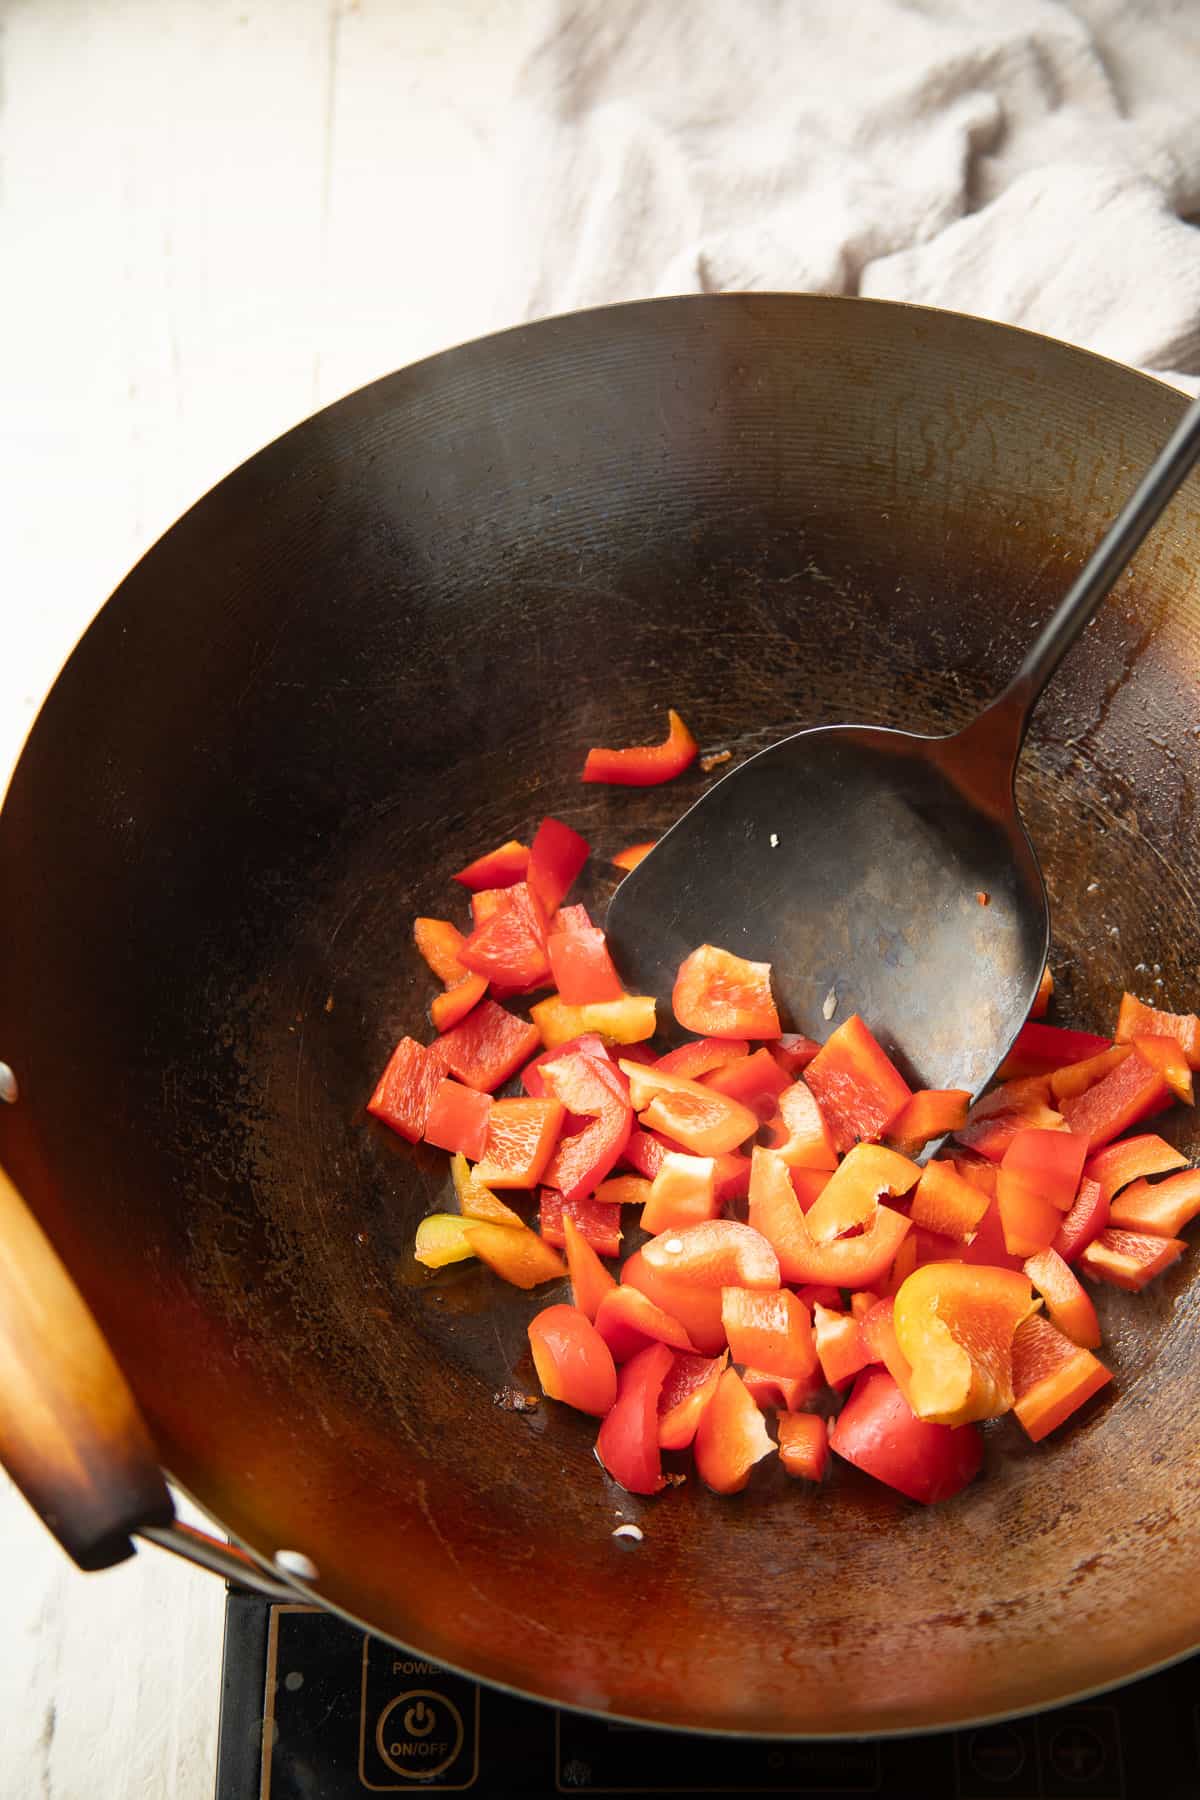 Peppers being stir-fried in a wok.